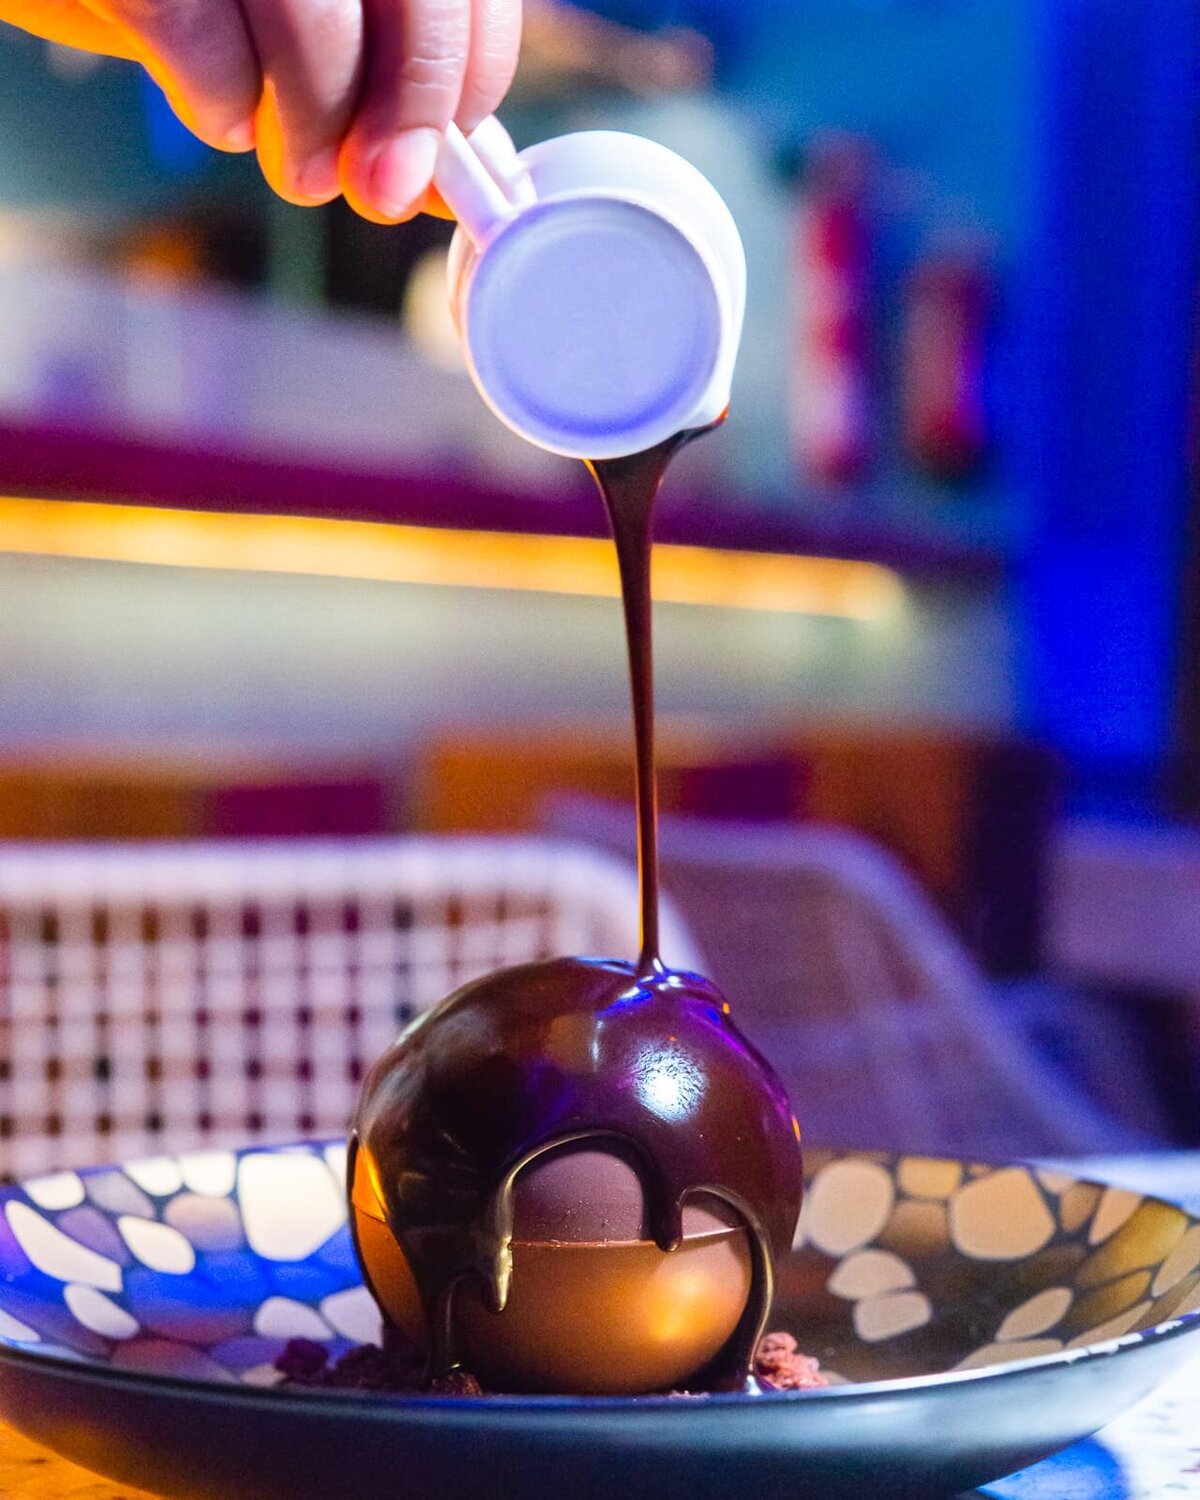 26.-Pour-shot-of-Chocolate-Sphere-A-Capalla-Restaurant